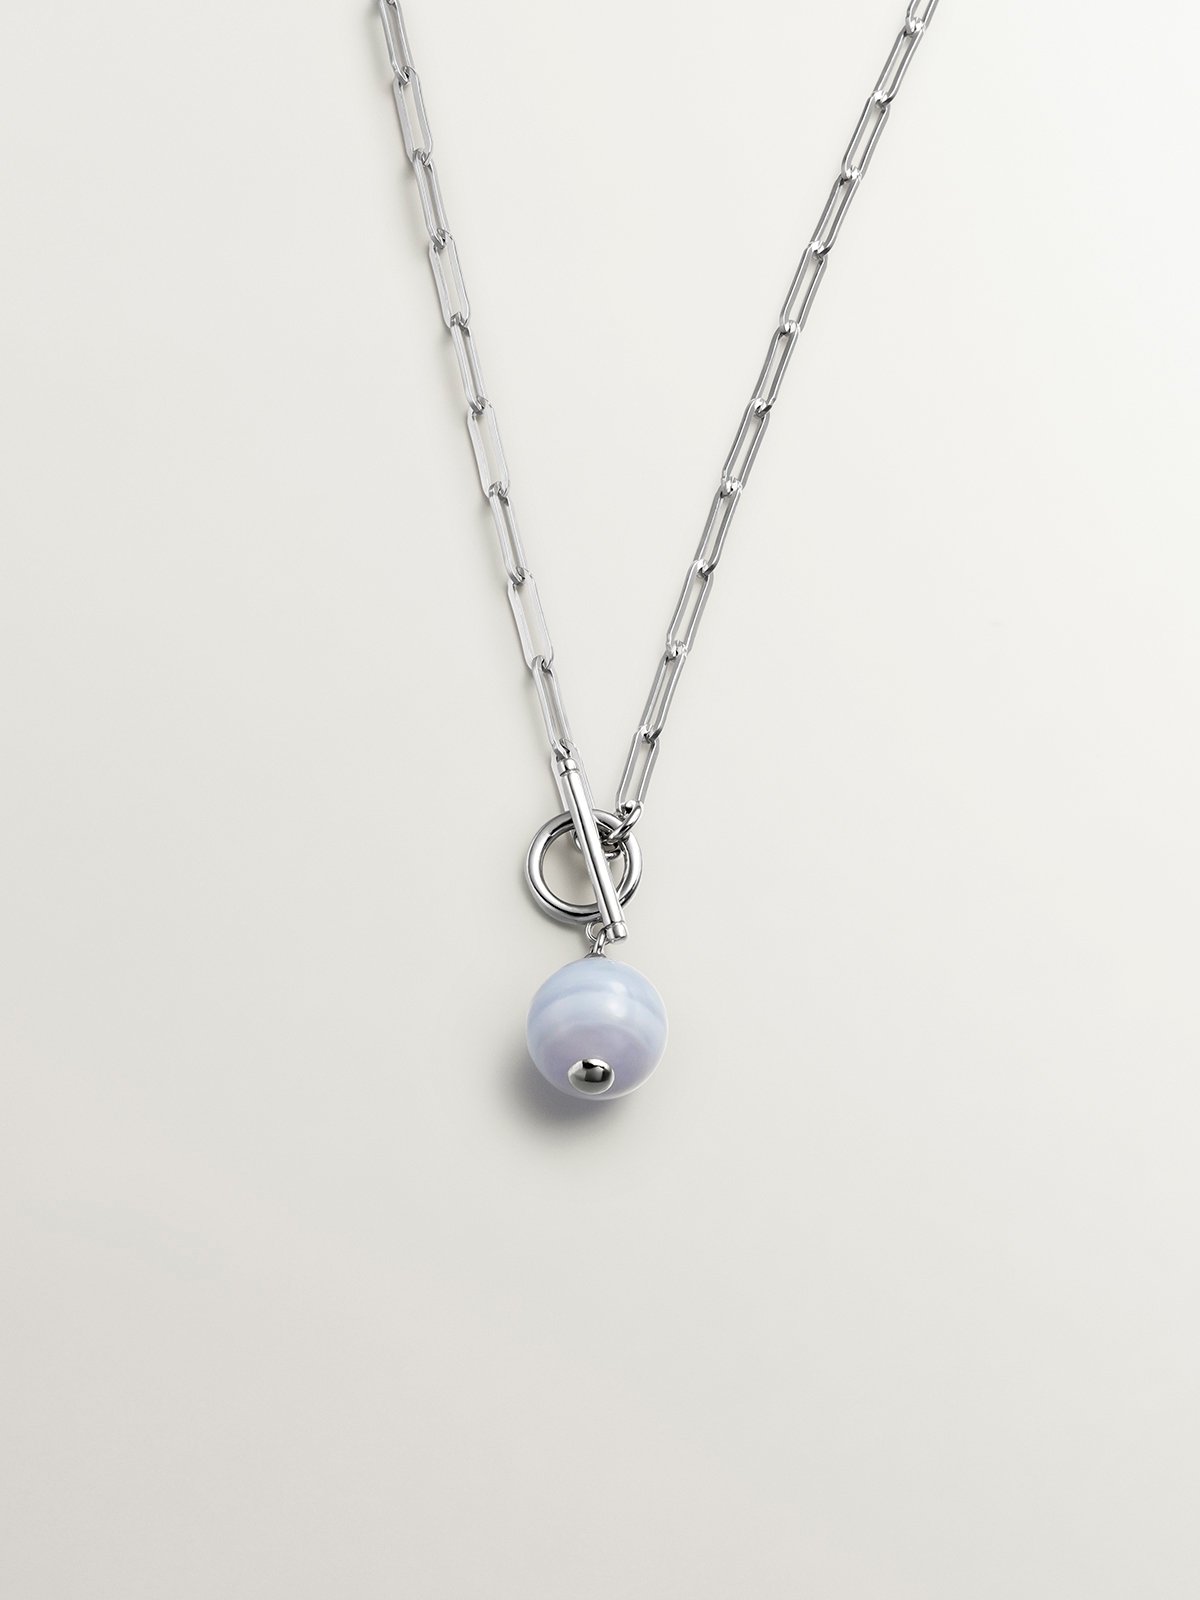 925 silver chain with blue agate